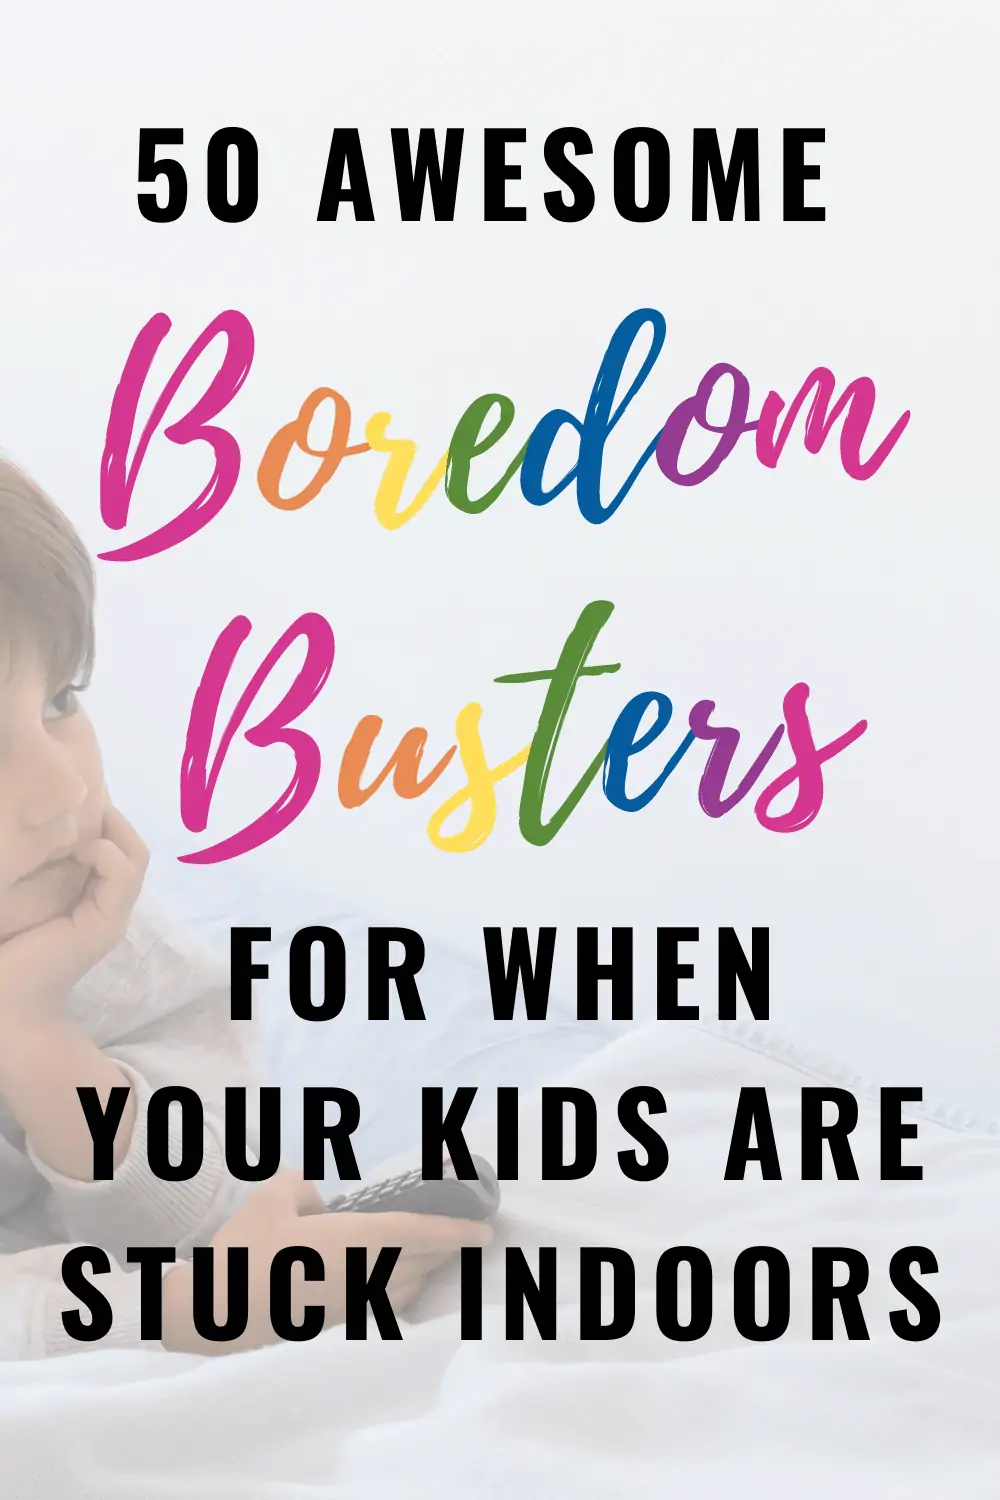 50+ Awesome Boredom Busters for Kids You Need in Your Back Pocket